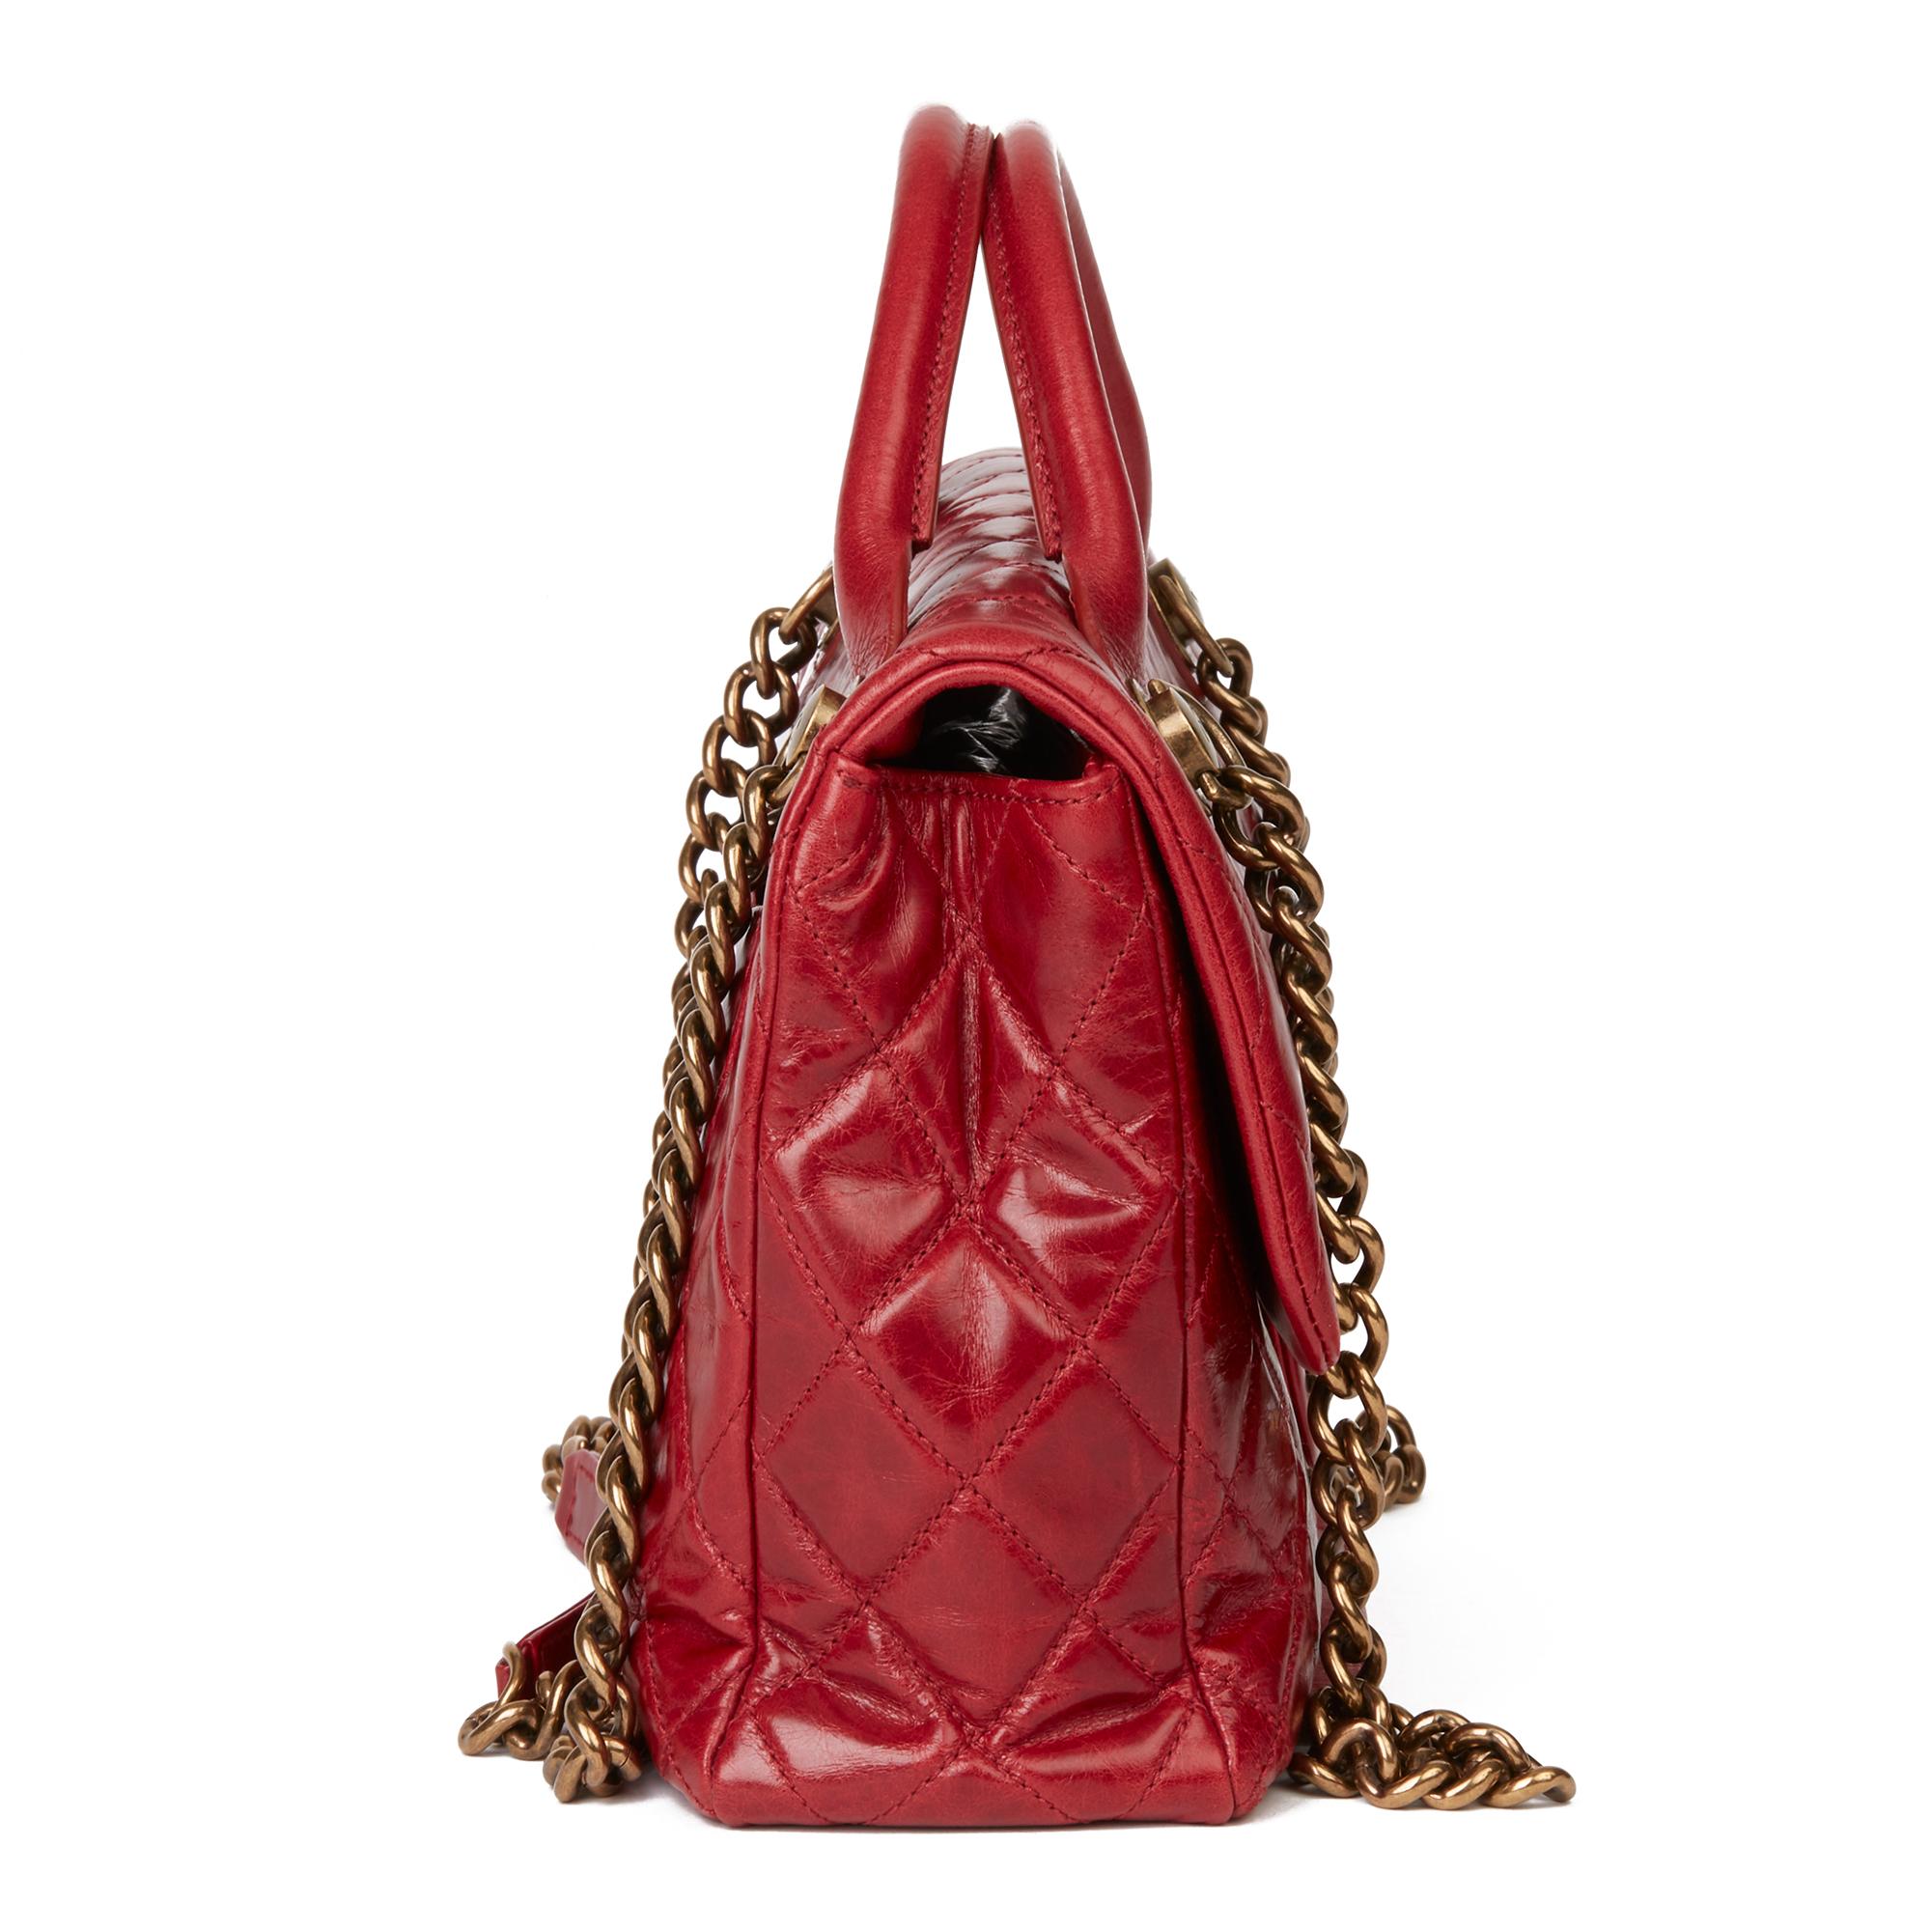 CHANEL
Red Quilted Glazed Calfskin Leather Medium Castle Rock Flap Bag

Xupes Reference: HB3288
Serial Number: 19890089
Age (Circa): 2014
Accompanied By: Chanel Dust Bag, Box, Authenticity Card
Authenticity Details: Serial Sticker (Made in Italy)